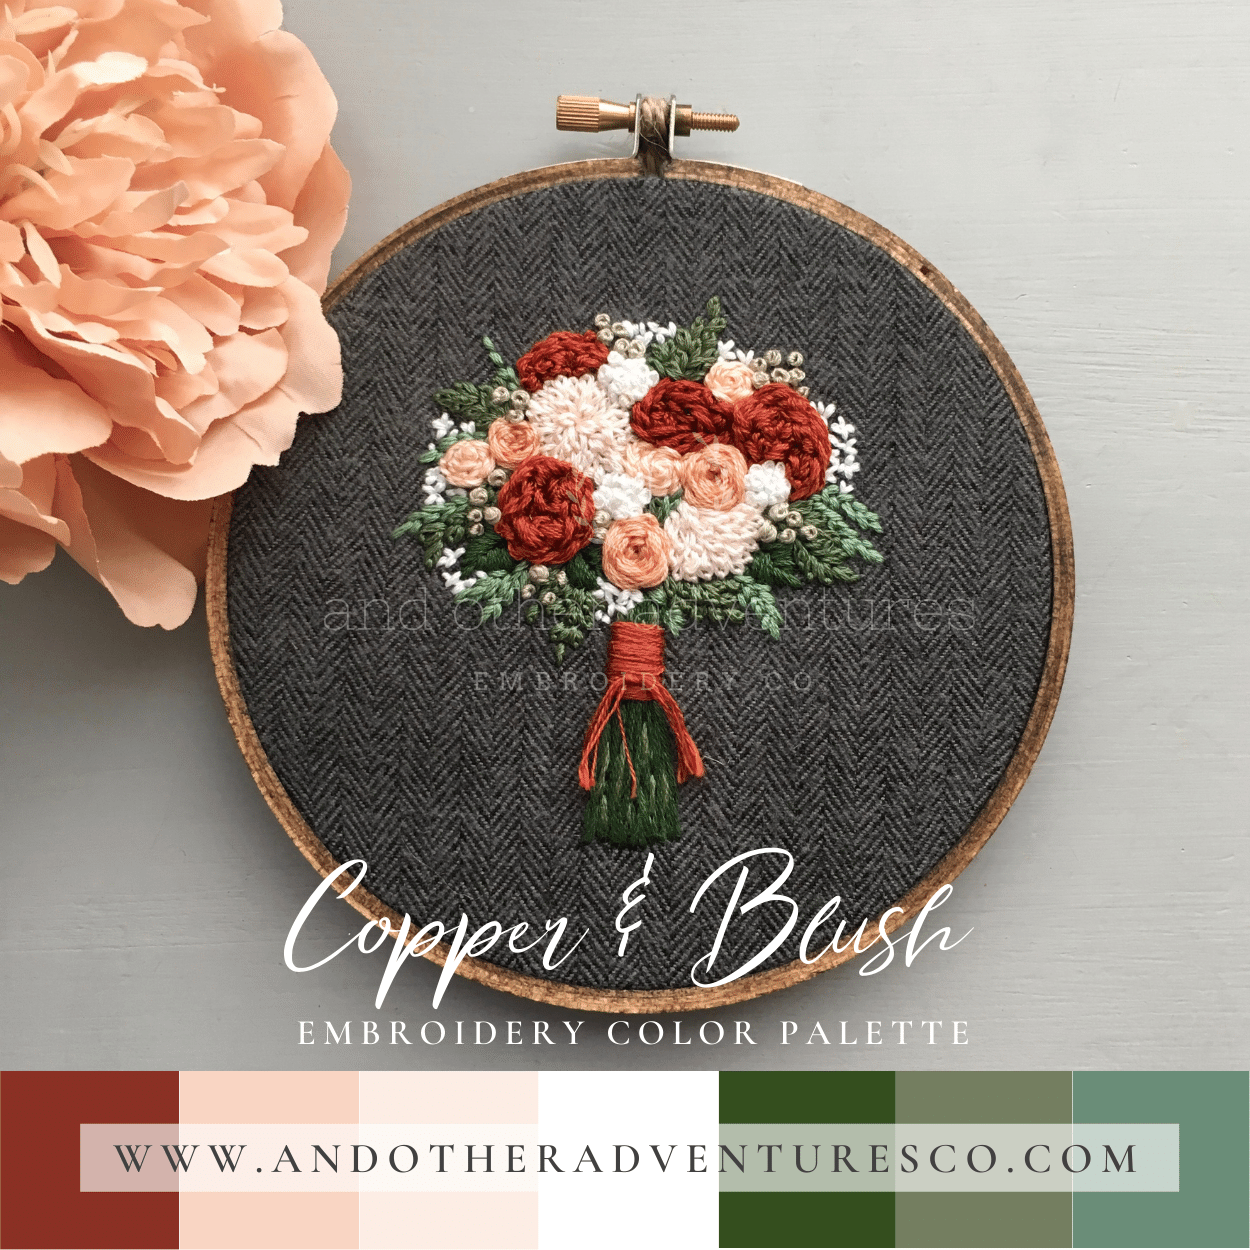 Copper & Blush Hand Embroidery Color Palette by And Other Adventures Embroidery Co